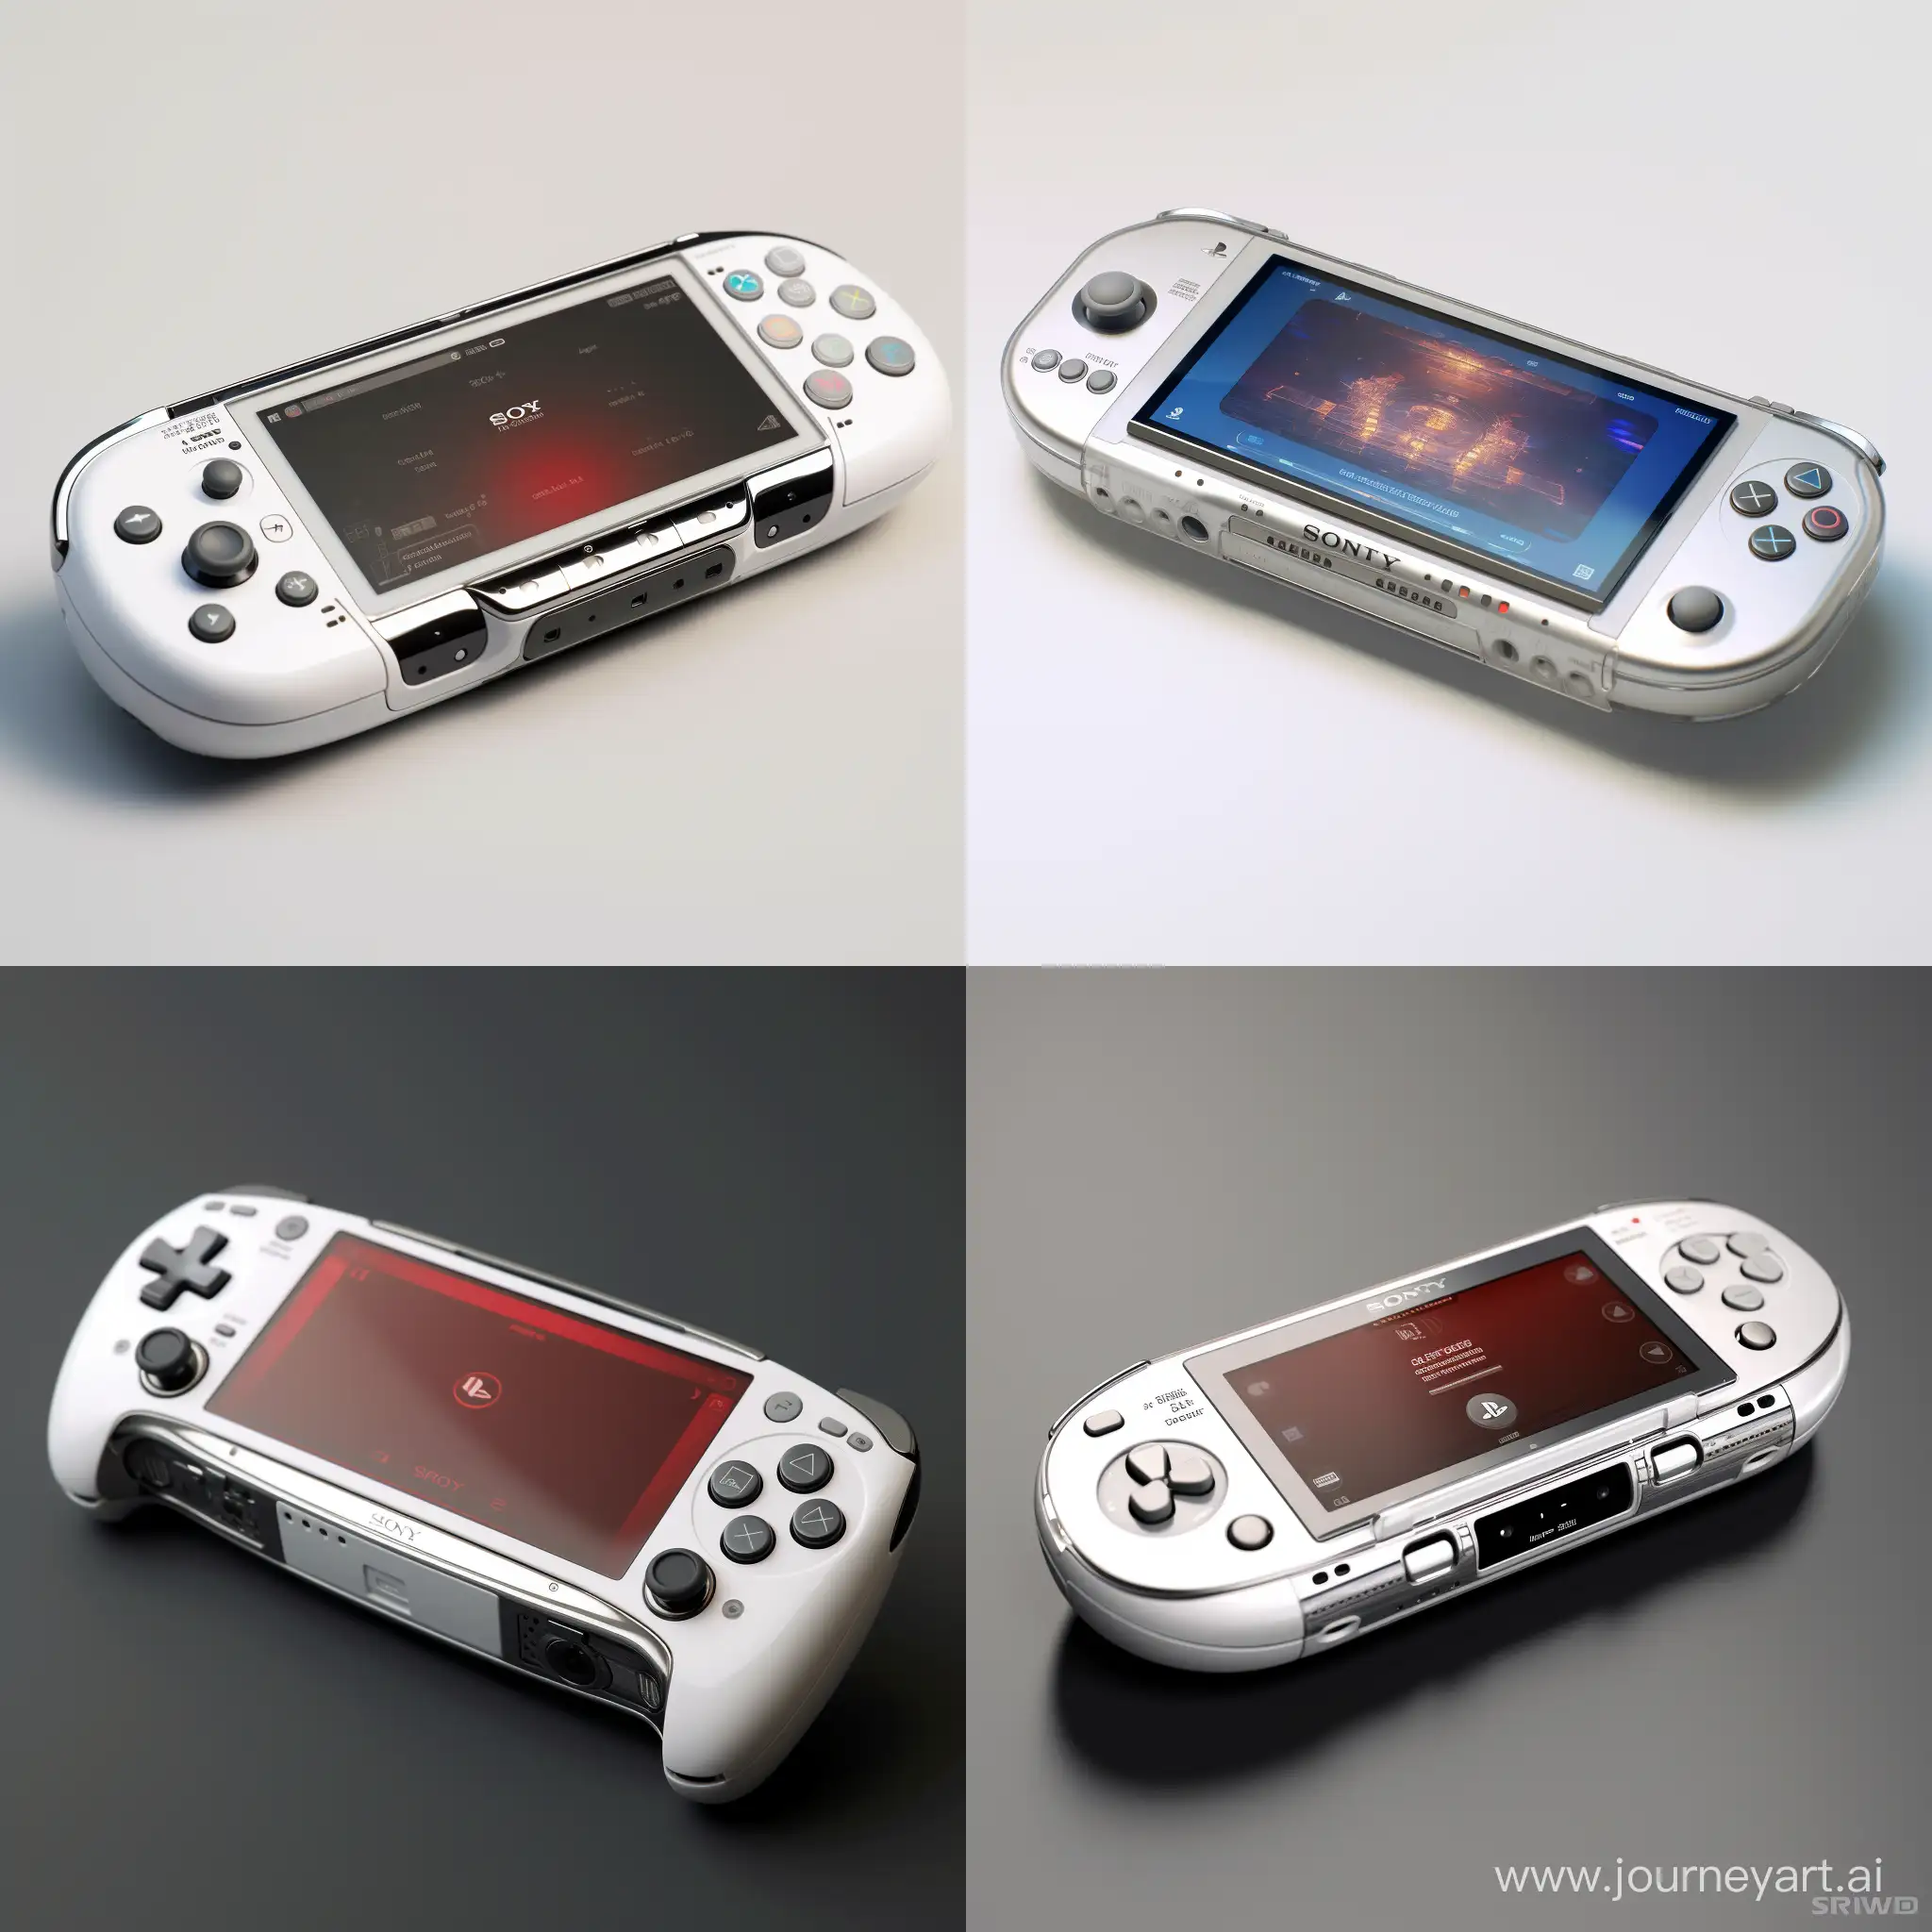 Futuristic-White-Sony-PSP-2025-with-Touchscreen-and-AMD-Ryzen-7